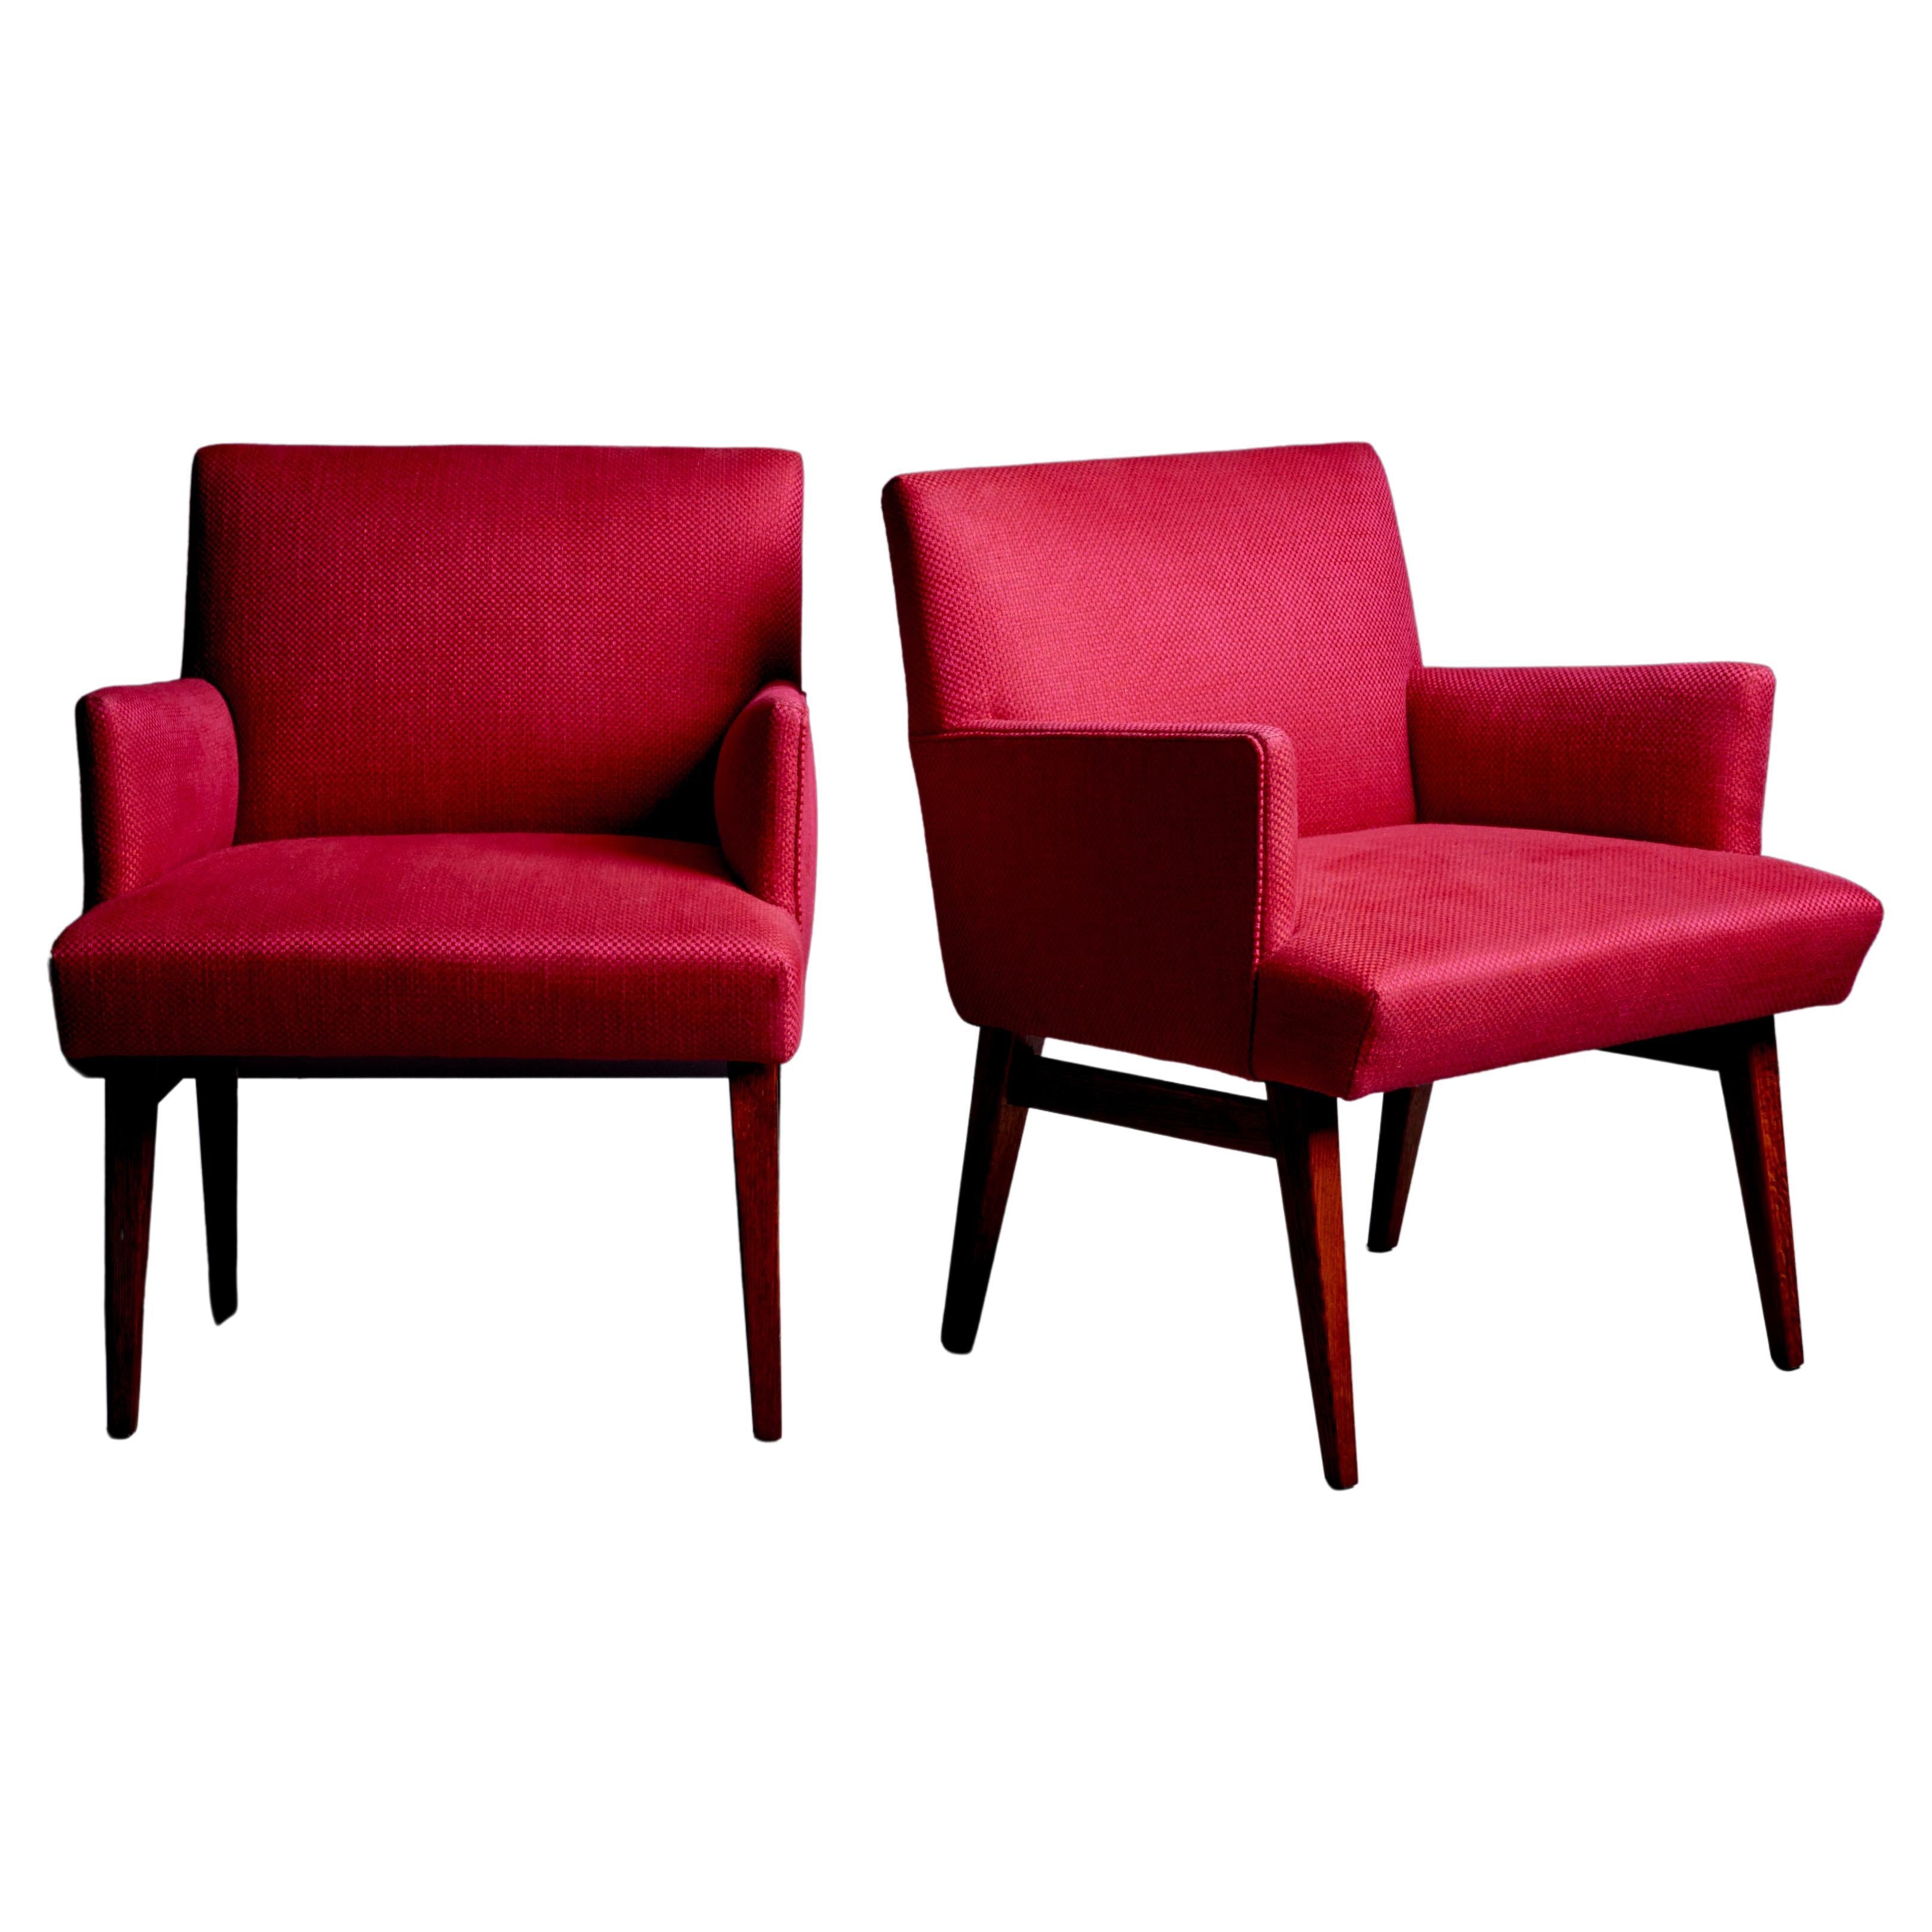 Pair of New Upholstered Midcentury Armchairs in Magenta, USA, 1950s